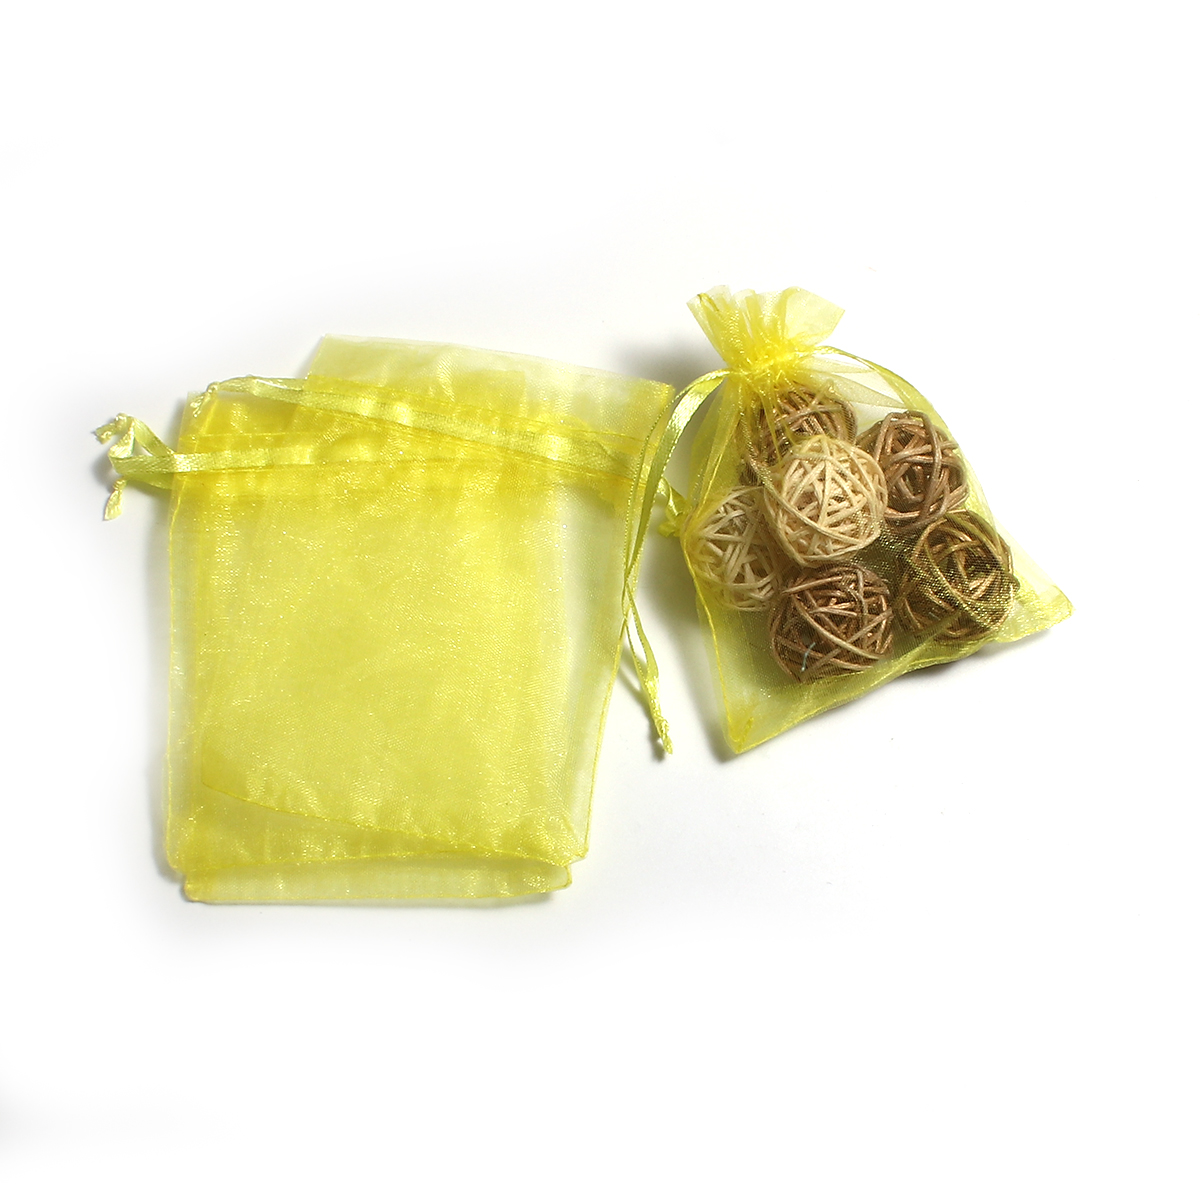 Picture of Wedding Gift Organza Jewelry Bags Drawstring Rectangle Yellow (Usable Space: 9.5x9cm) 12cm(4 6/8") x 9cm(3 4/8"), 50 PCs